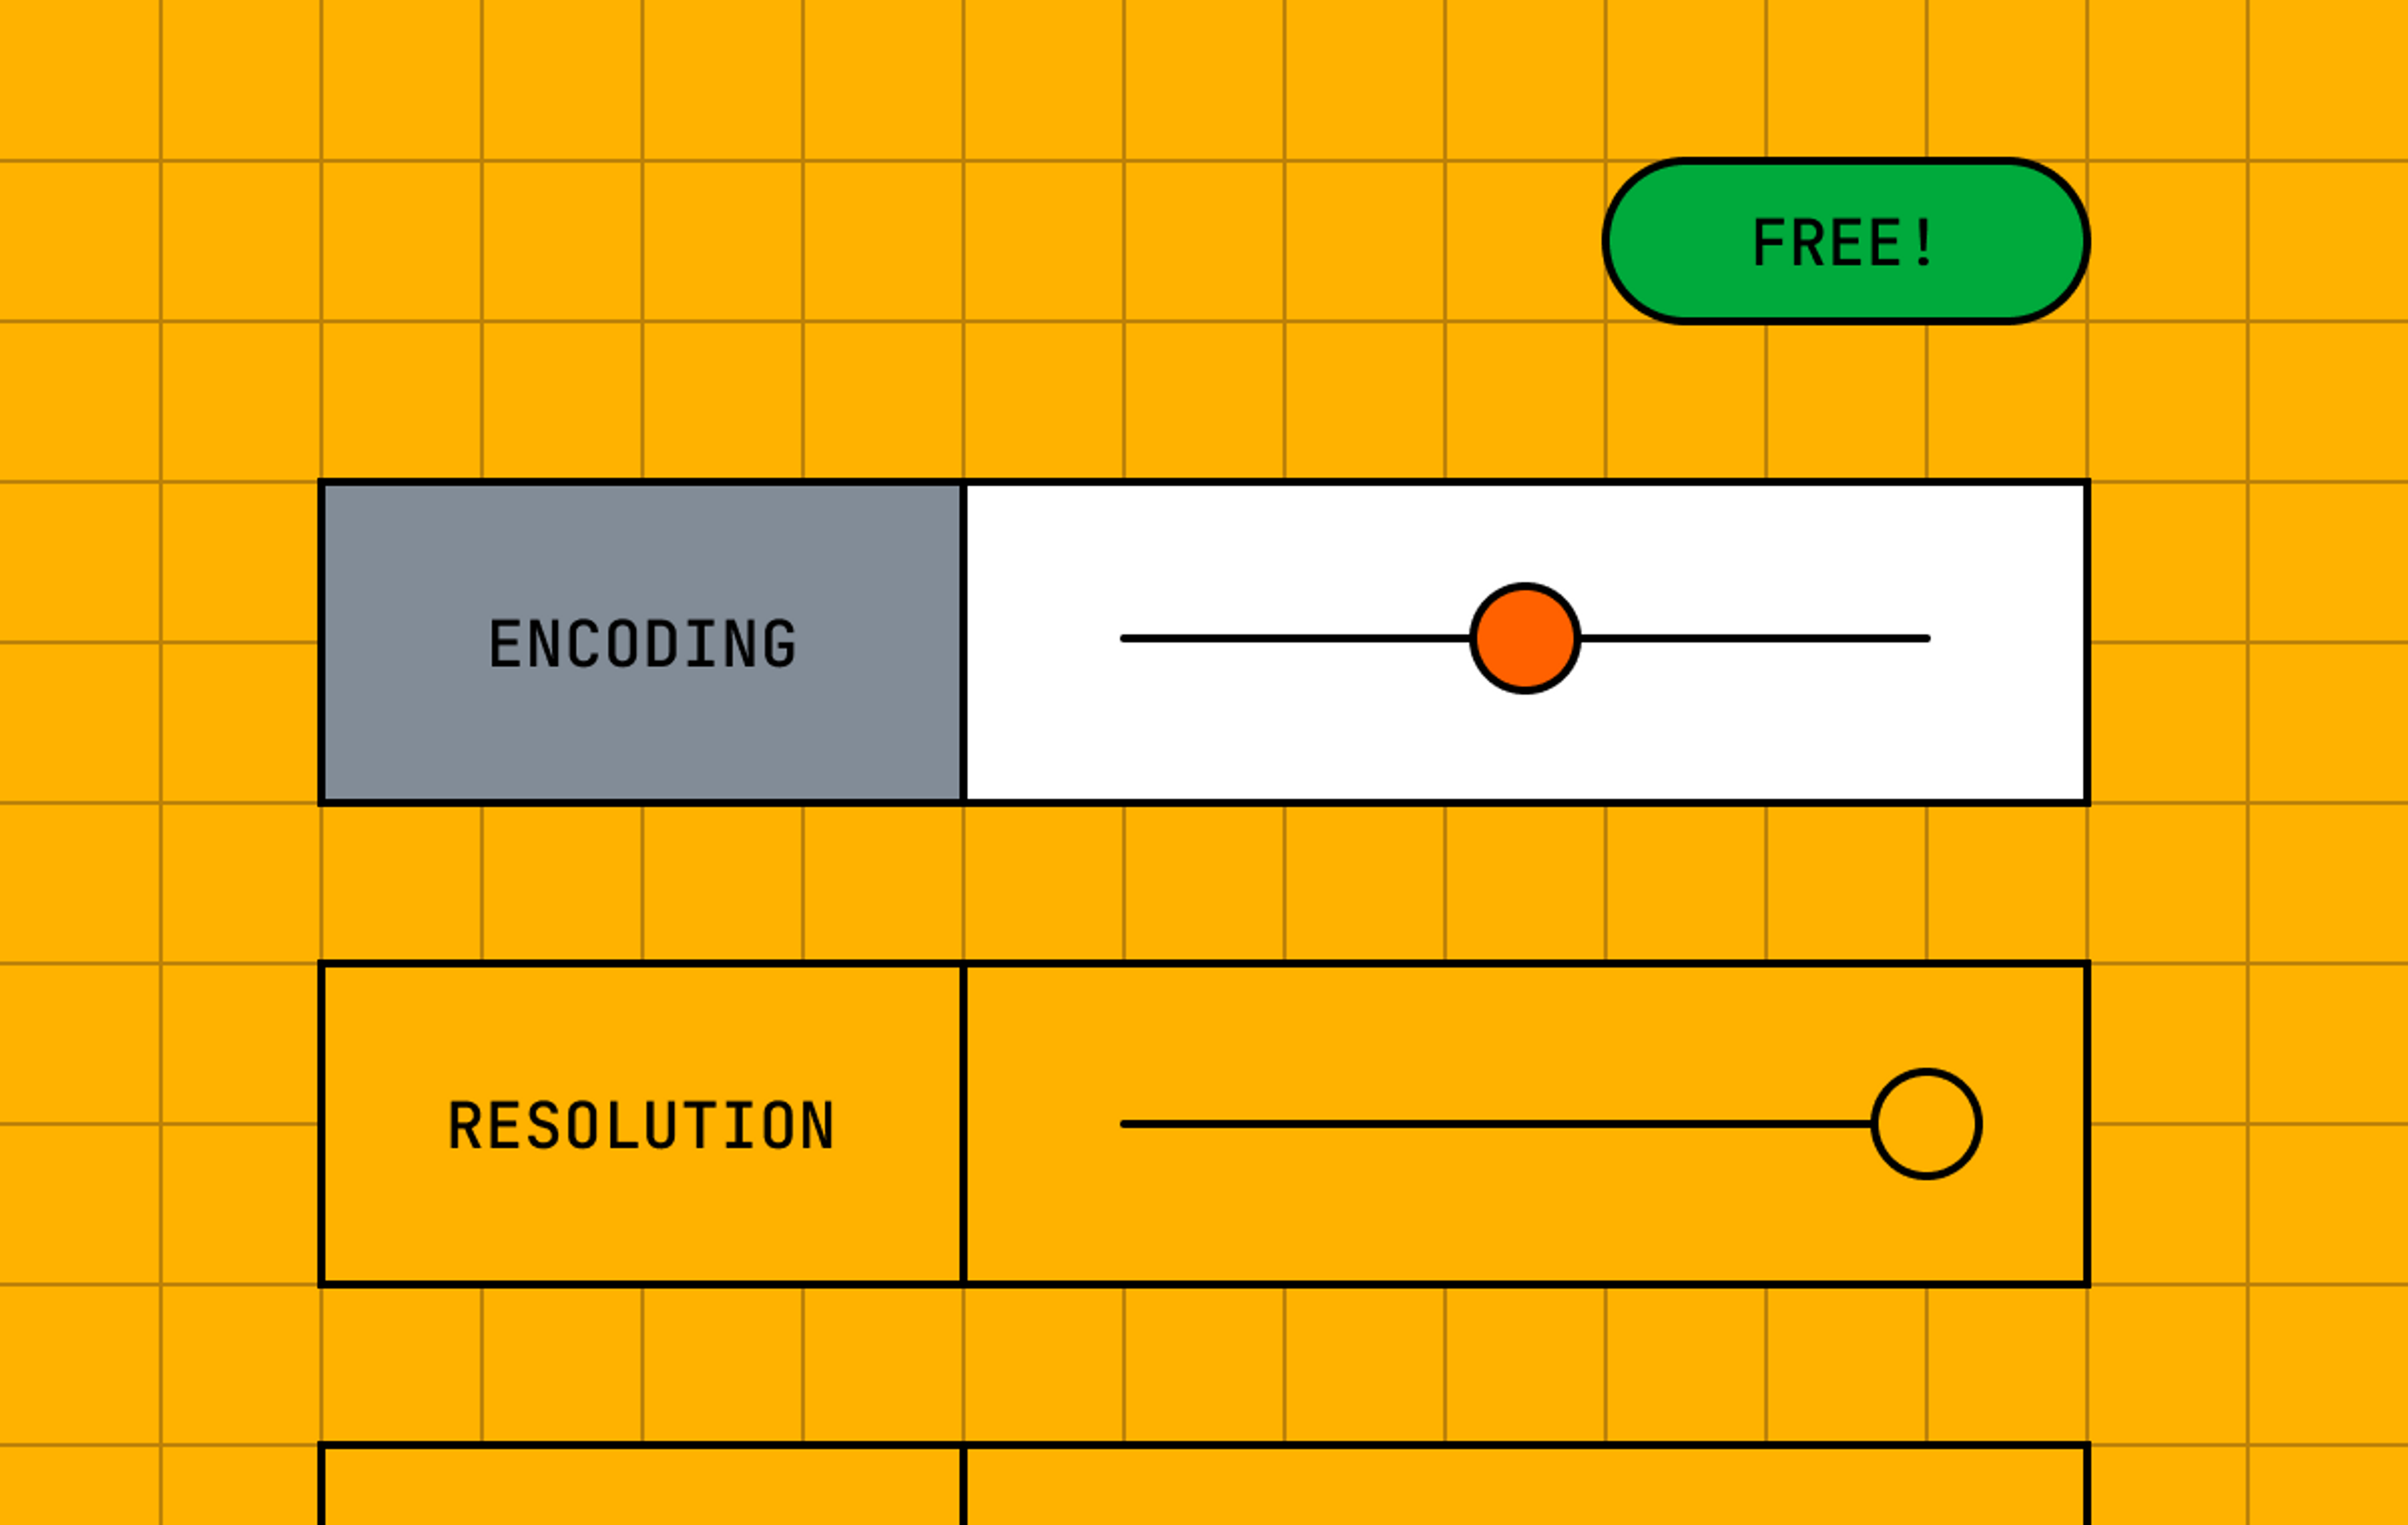 On a yellow background, there's a button that reads "Free!" And two images depicting levers, one with "Encoding" set to the middle and "Resolution" set to max.